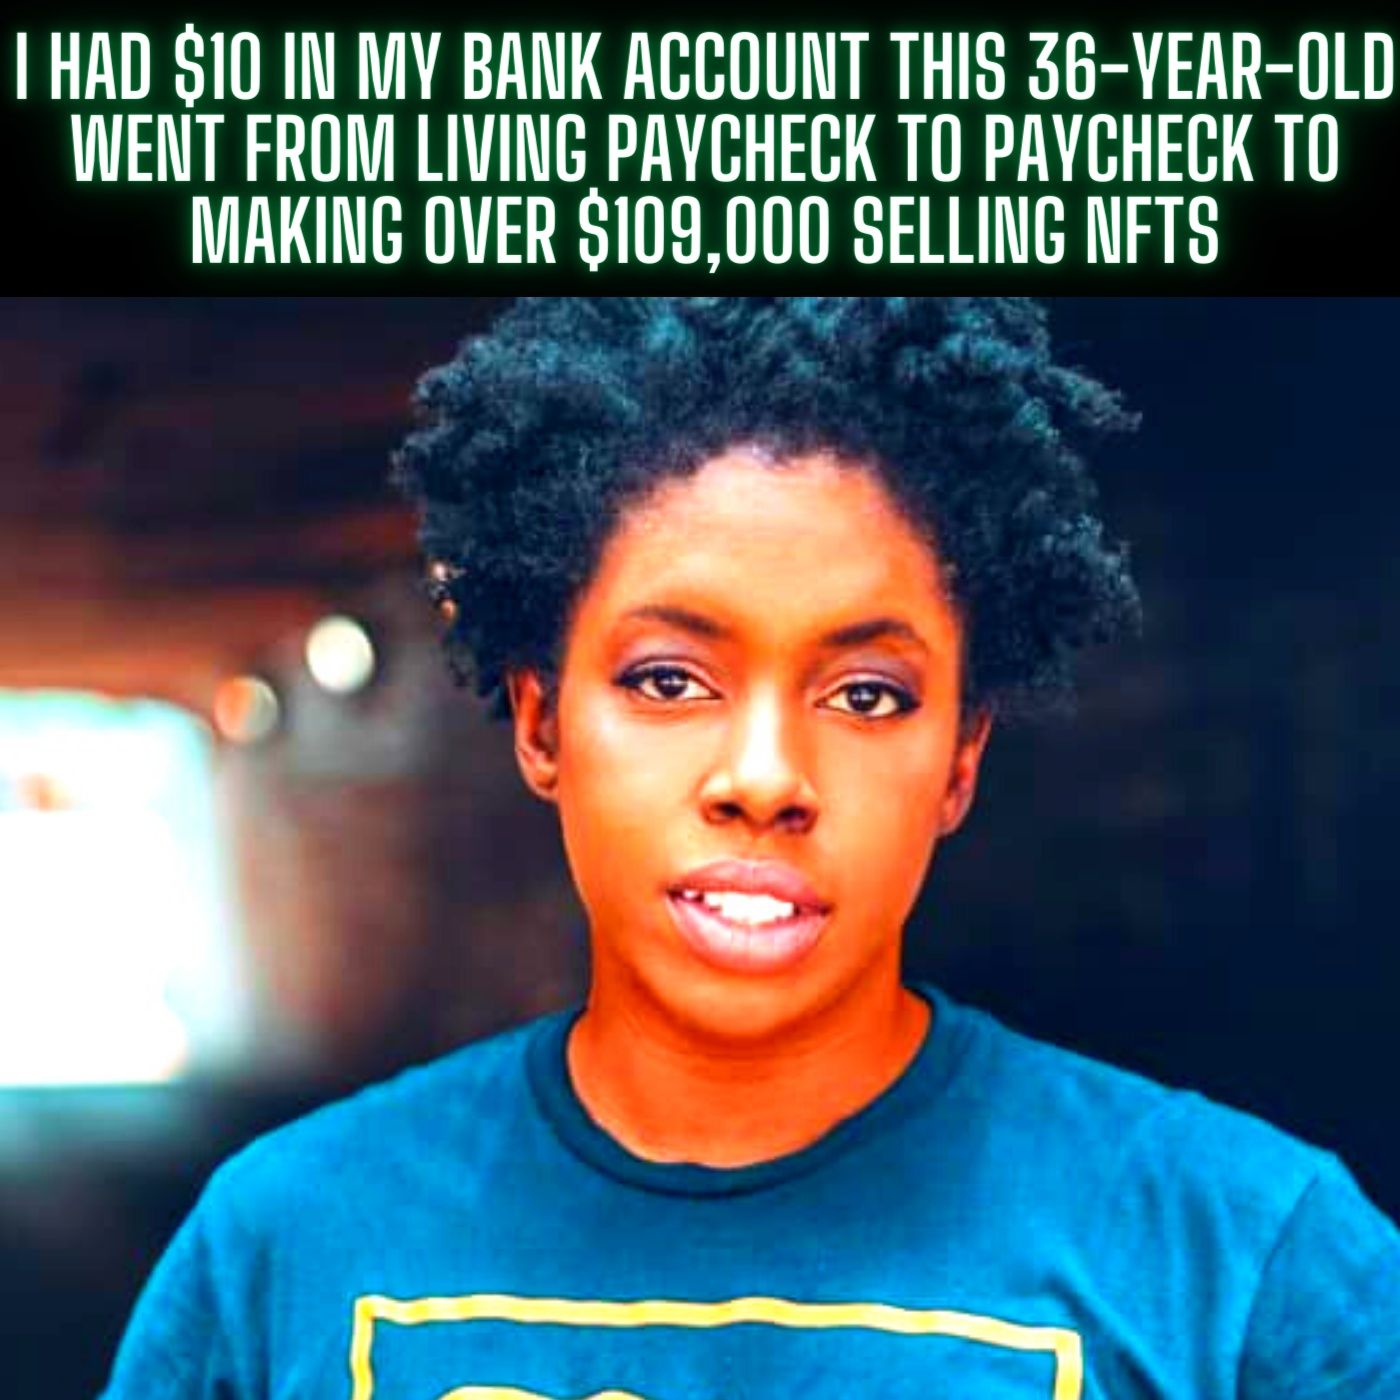 I had $10 in my bank account’: This 36-year-old went from living paycheck to paycheck to making over $109,000 selling NFTs